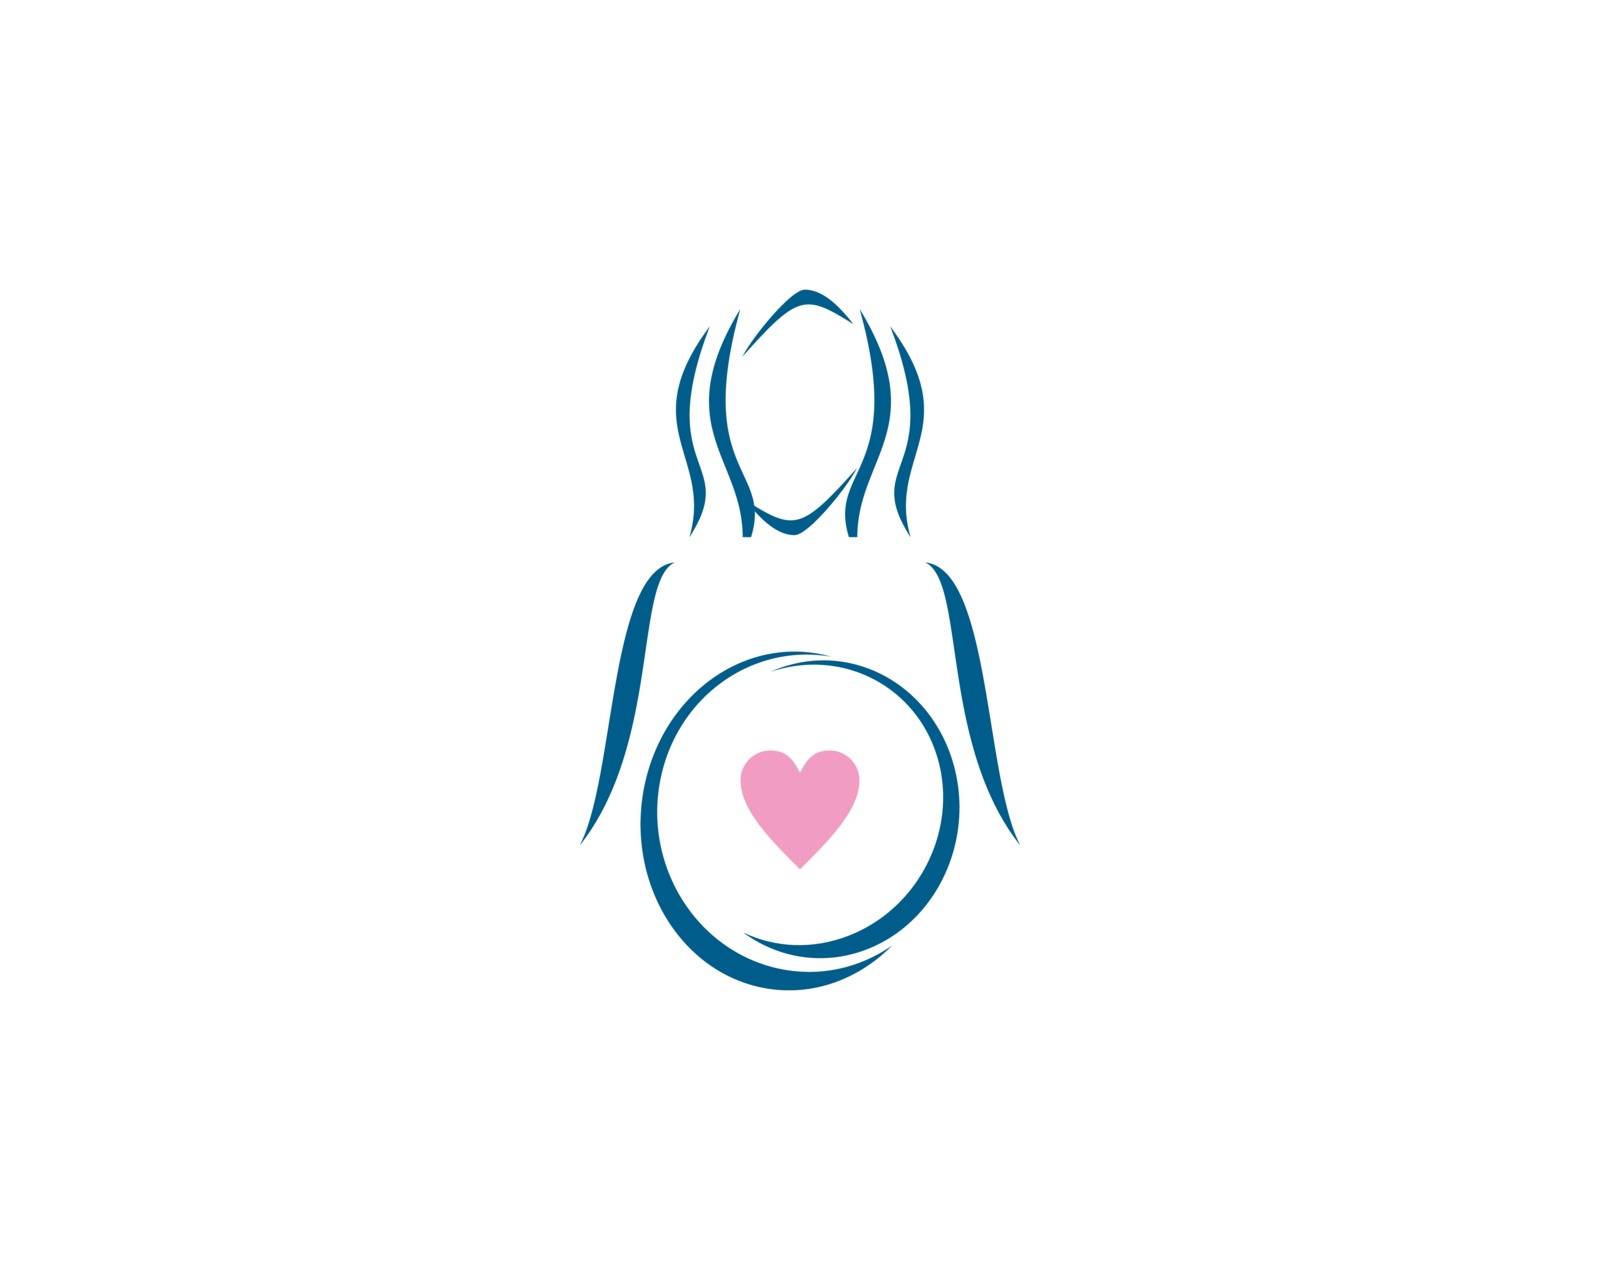 logos related to health, care, babies and pregnant women